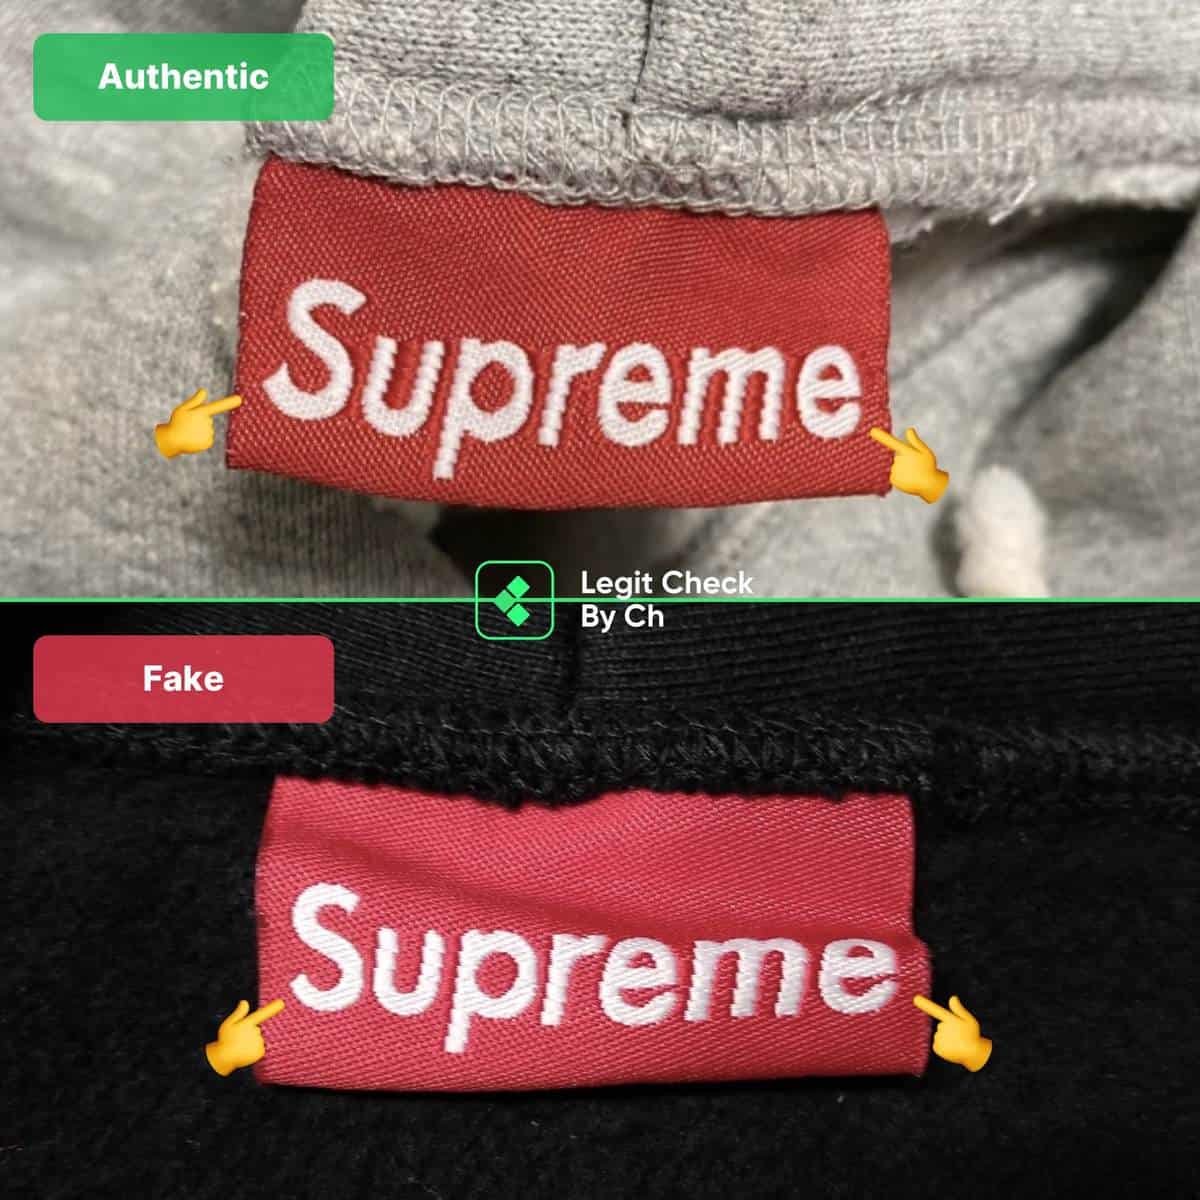 Supreme hoodie real vs fake review. How to spot counterfeit